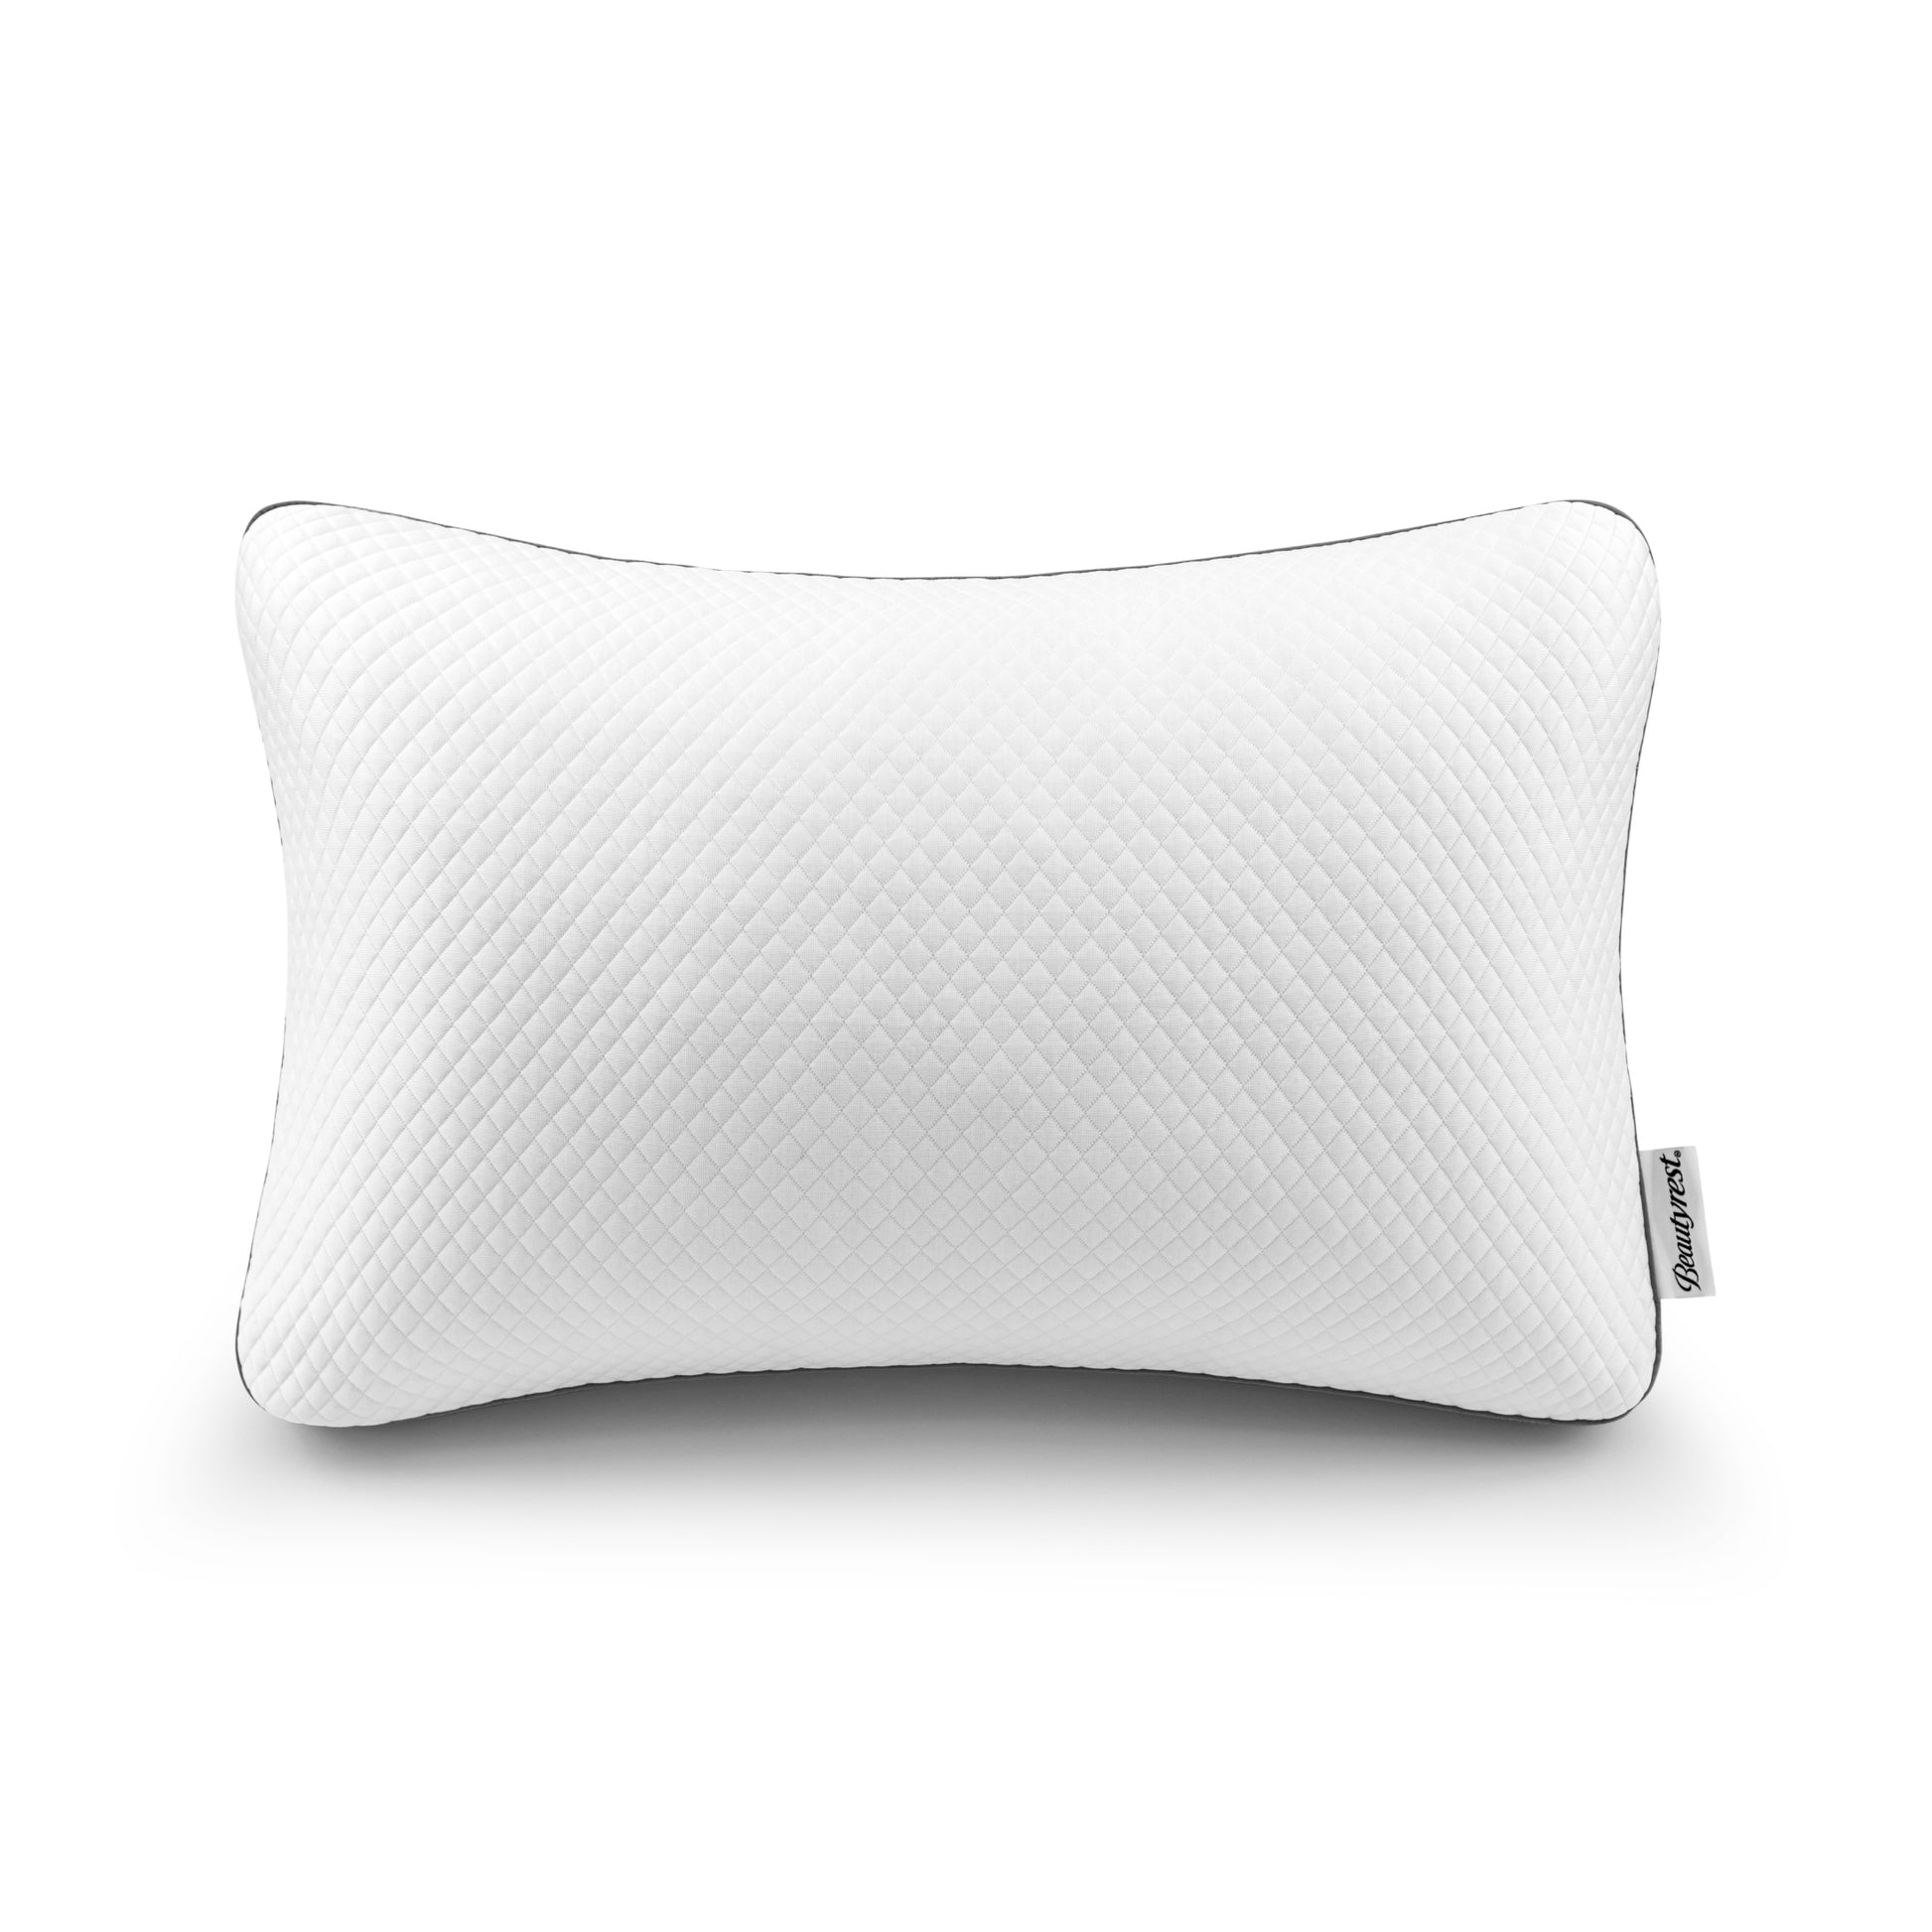 Beautyrest Absolute Relaxation Pillow Top View